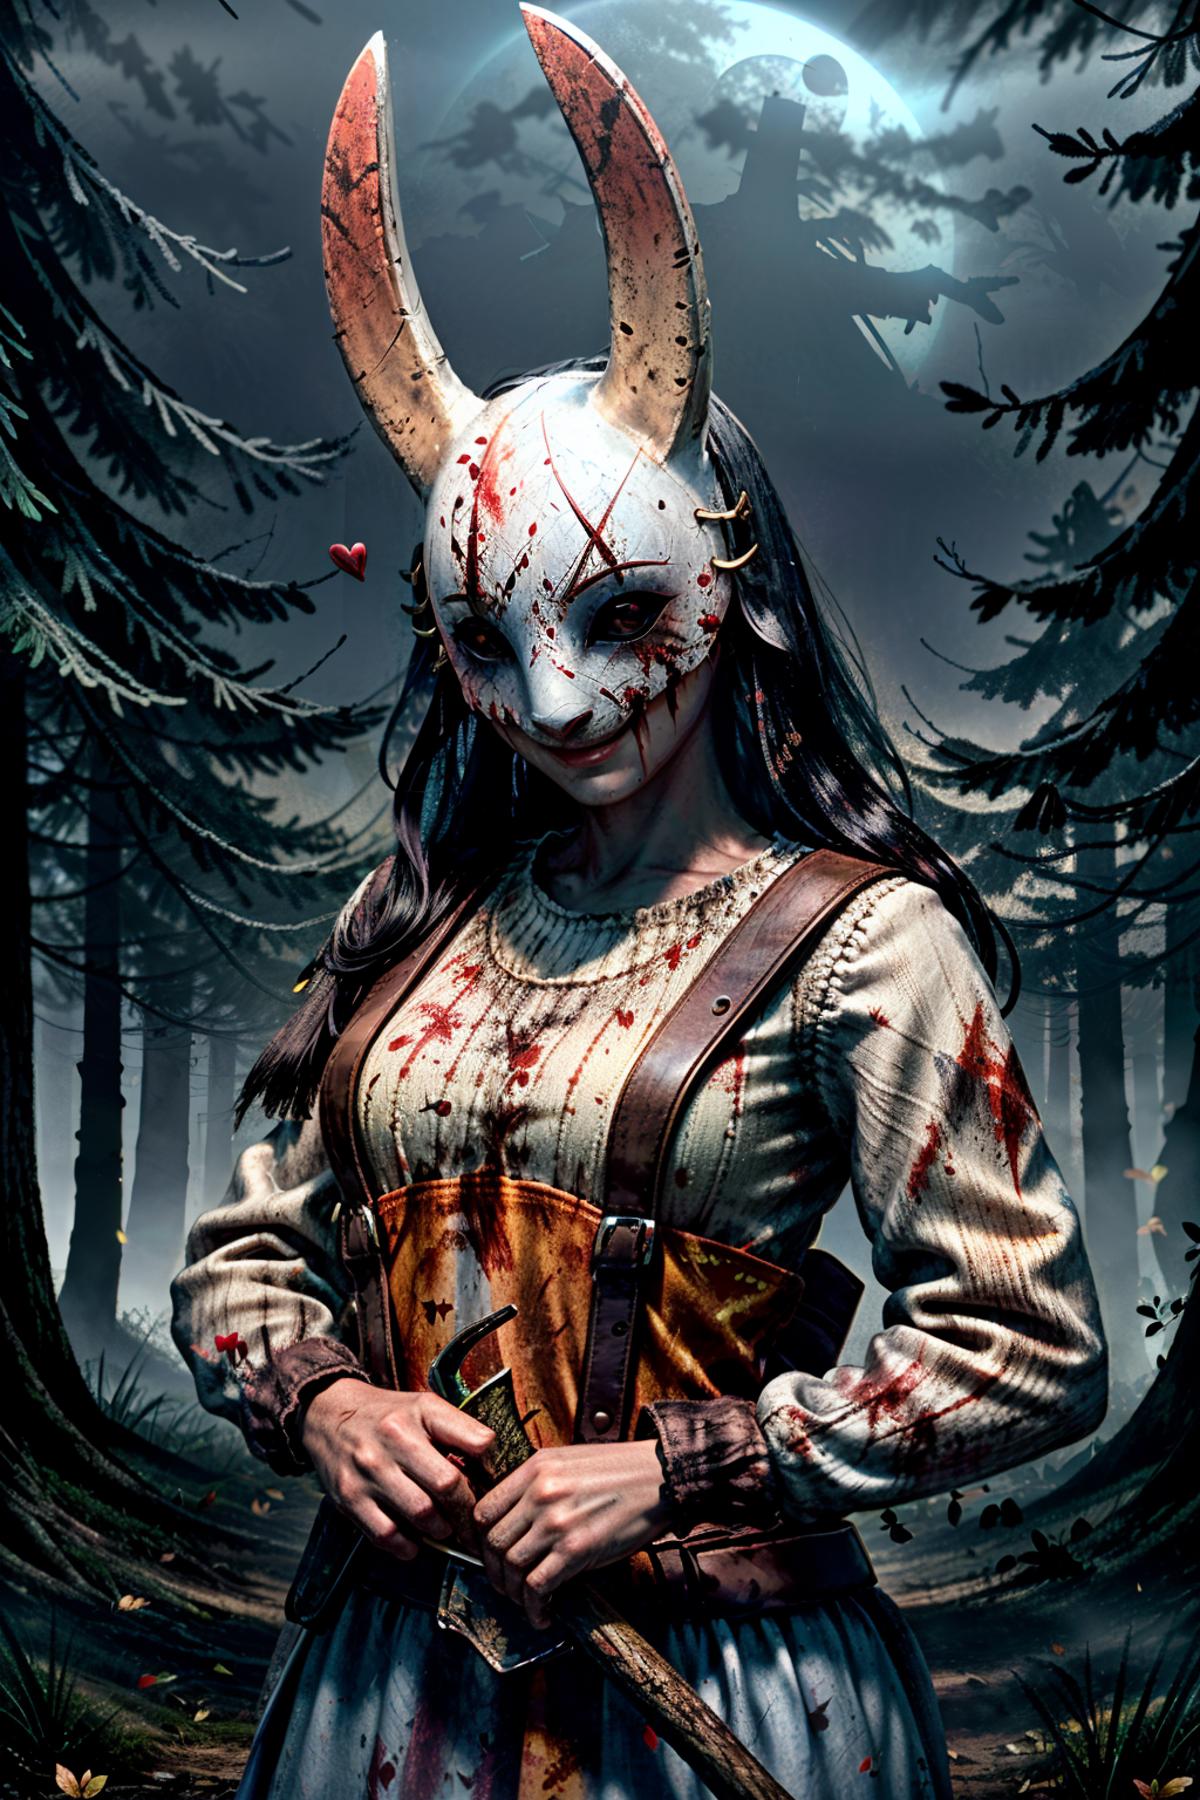 The Huntress from Dead by Daylight image by BloodRedKittie